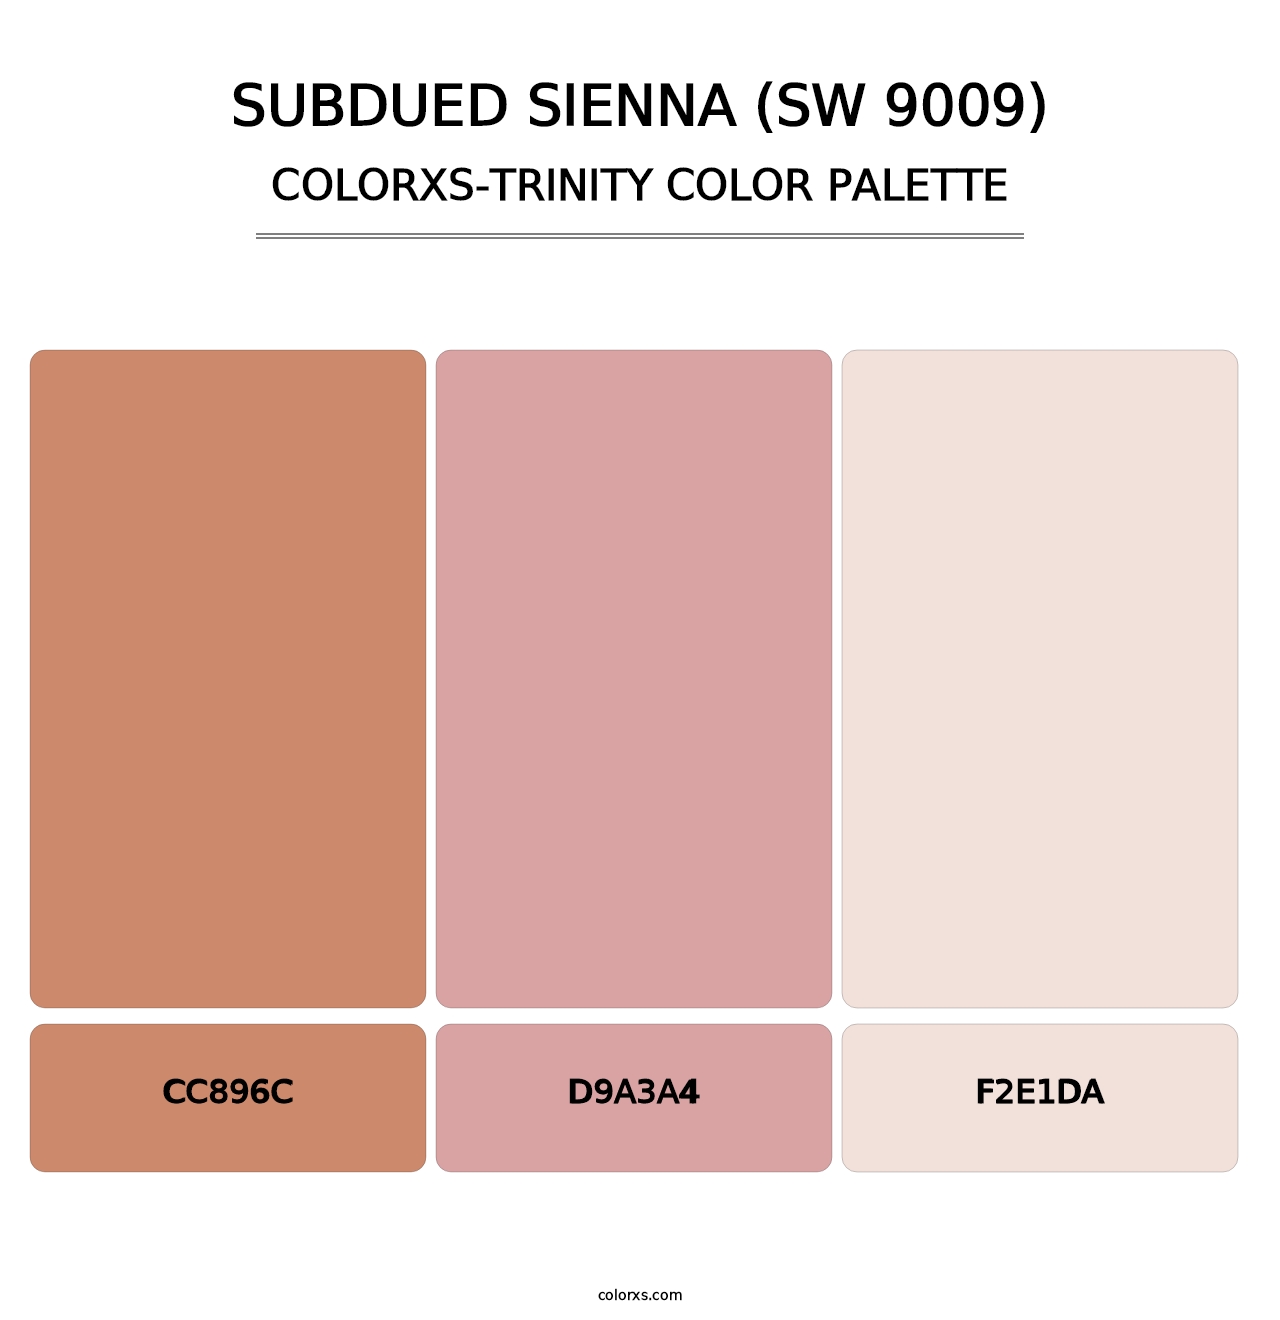 Subdued Sienna (SW 9009) - Colorxs Trinity Palette